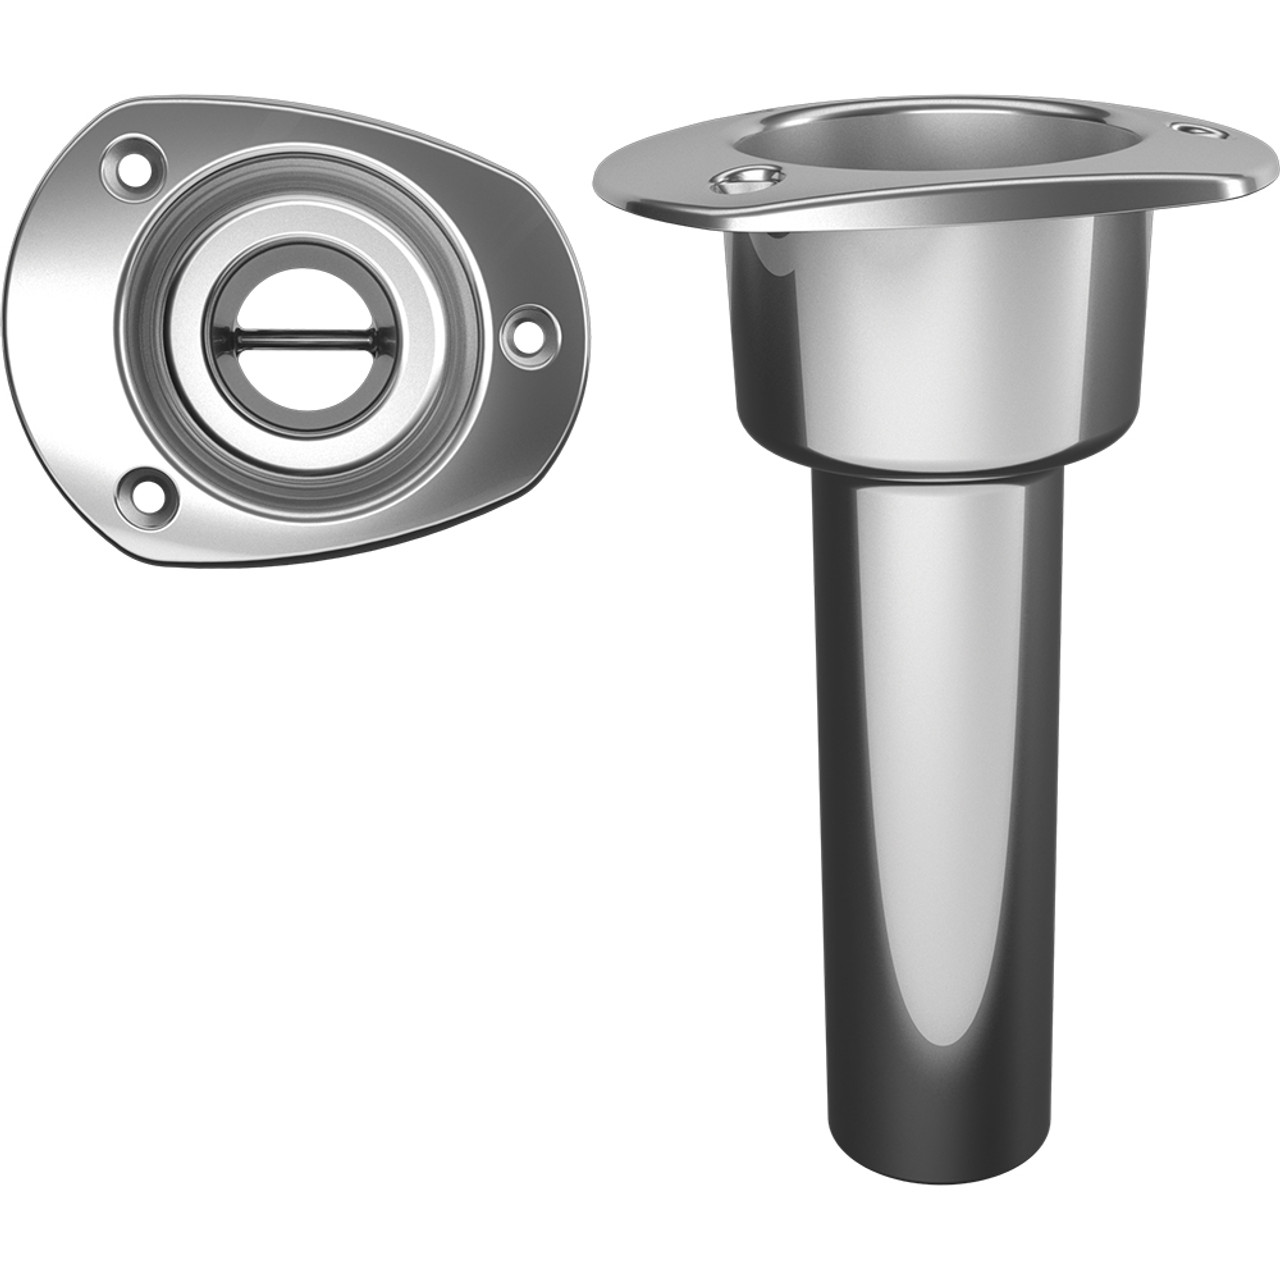 Mate Series Stainless Steel 0 Rod & Cup Holder - Open - Oval Top